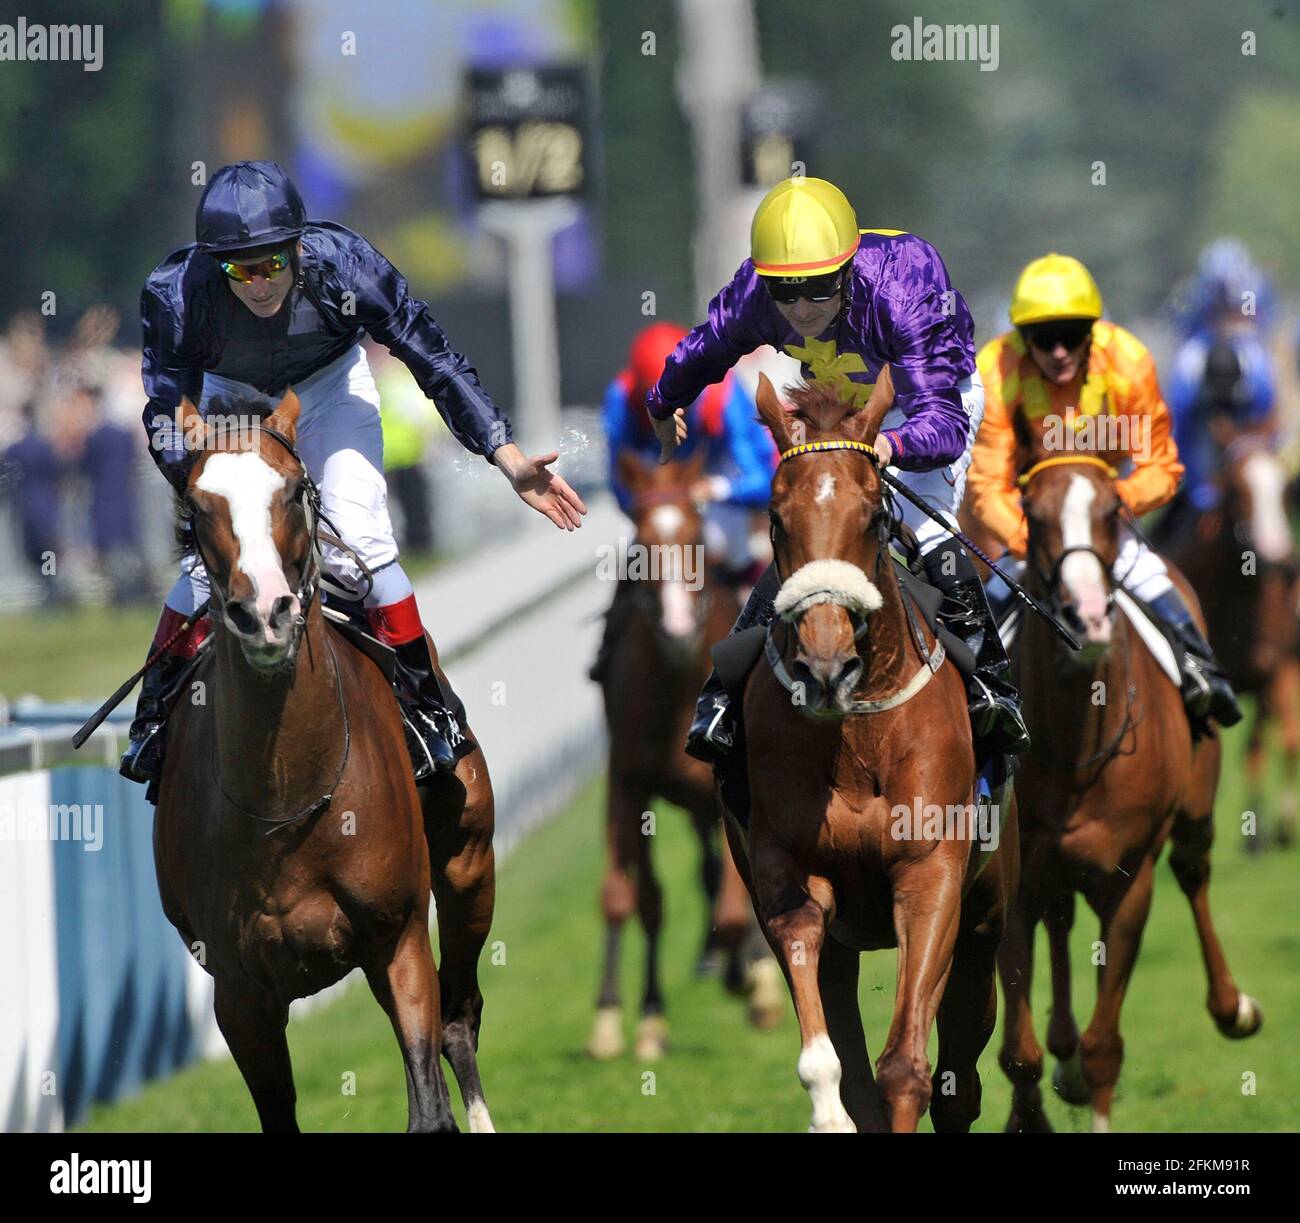 ROYAL ASCOT 2010 17/6/2010. THE GOLD CUP. PAT SMULLEN ON RITE OF PASSAGE (RIGHT) AFTER WINNING NEXT TO 2ND PLACE JONNY MURTAGH ON AGE OF AQUARIUS.  PICTURE DAVID ASHDOWN Stock Photo